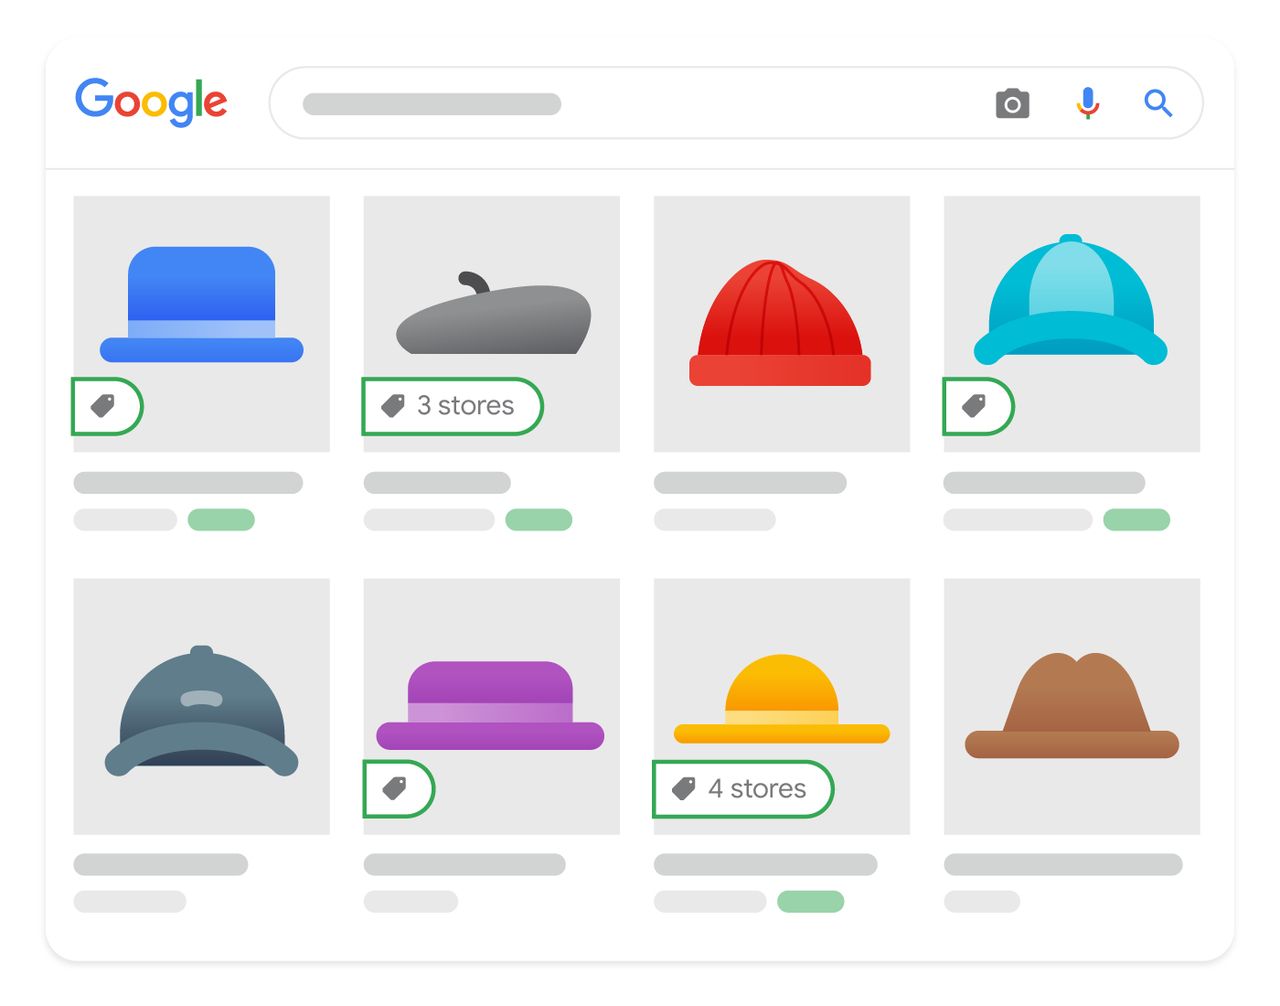 Google search results page featuring hats, with emphasis on markup schema.